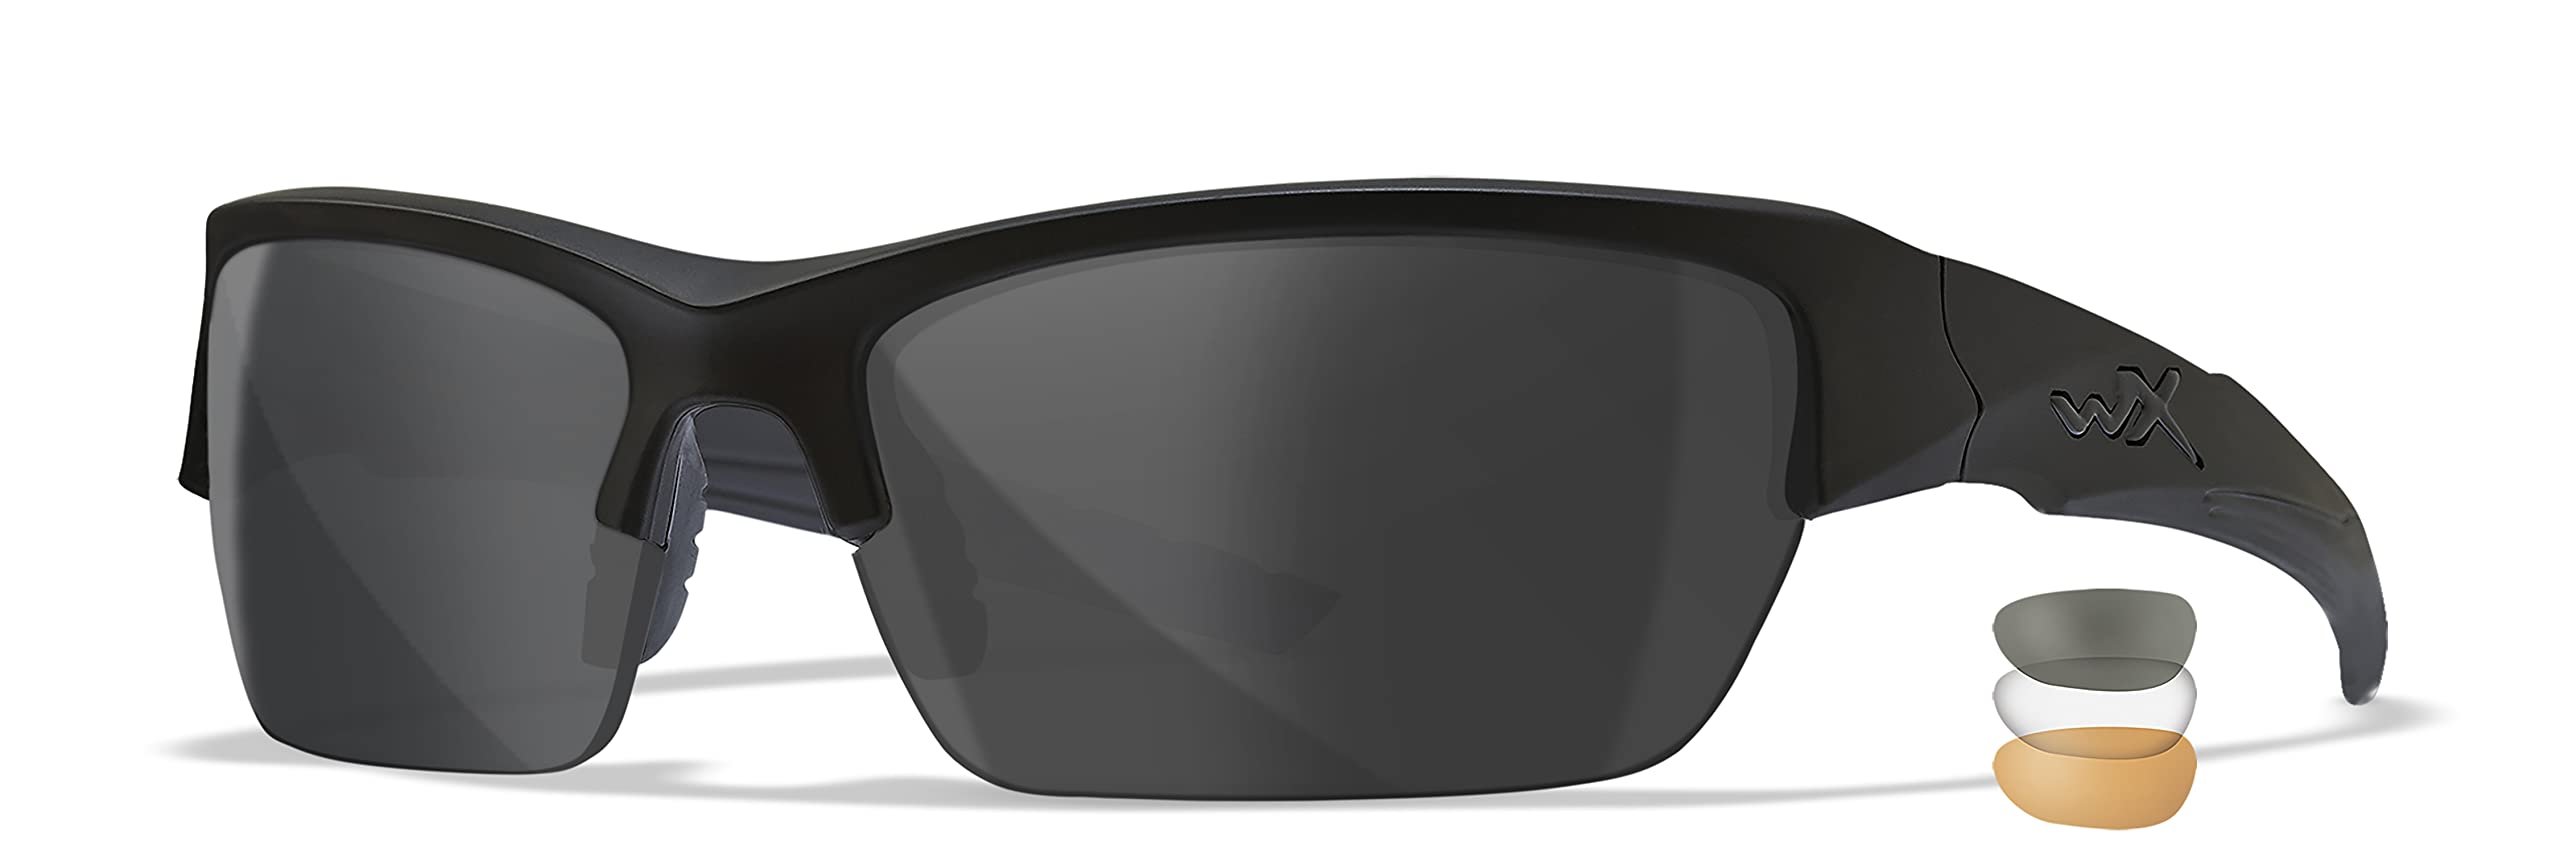 Wiley X WX Valor Tactical Sunglasses, Safety Glasses for Men and Women, Shatterproof UV Eye Protection for Combat, Shooting, Fishing, Biking, and Extreme Sports, Matte Black Frames, Grey, Clear, and Light Rust Tinted Lenses, Ballistic Rated